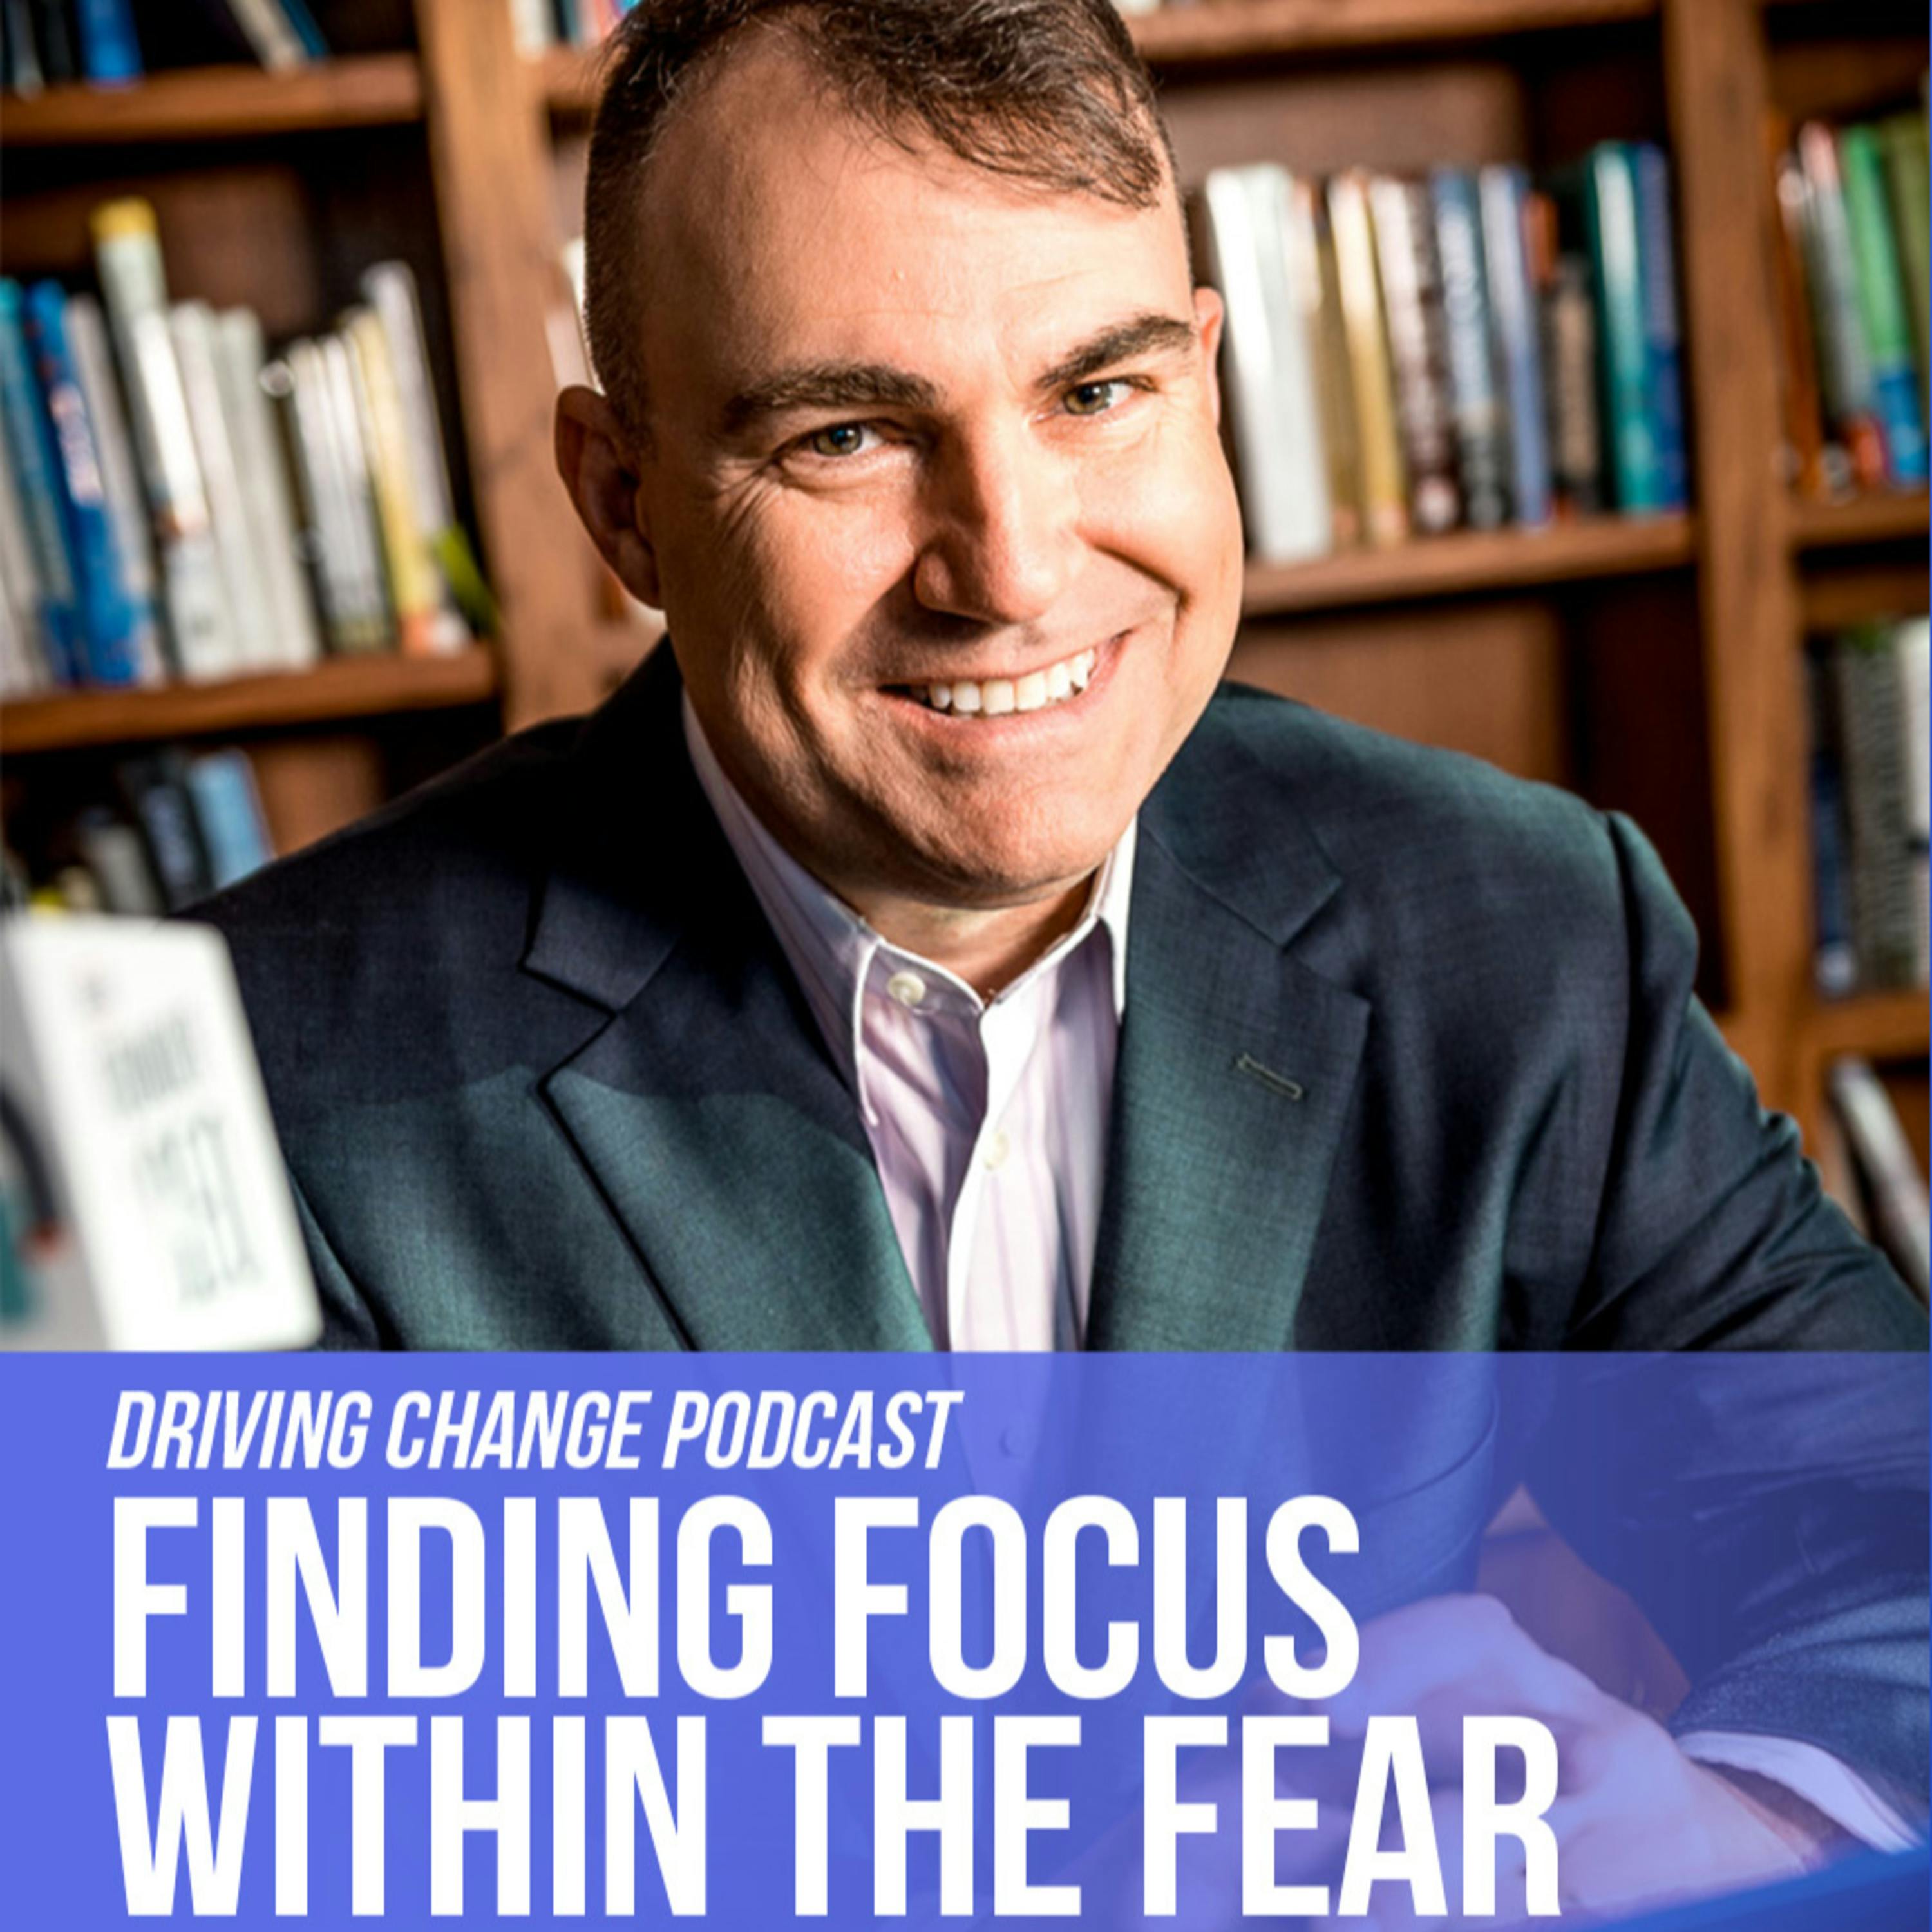 Todd Uterstaedt: Finding Focus Within the Fear